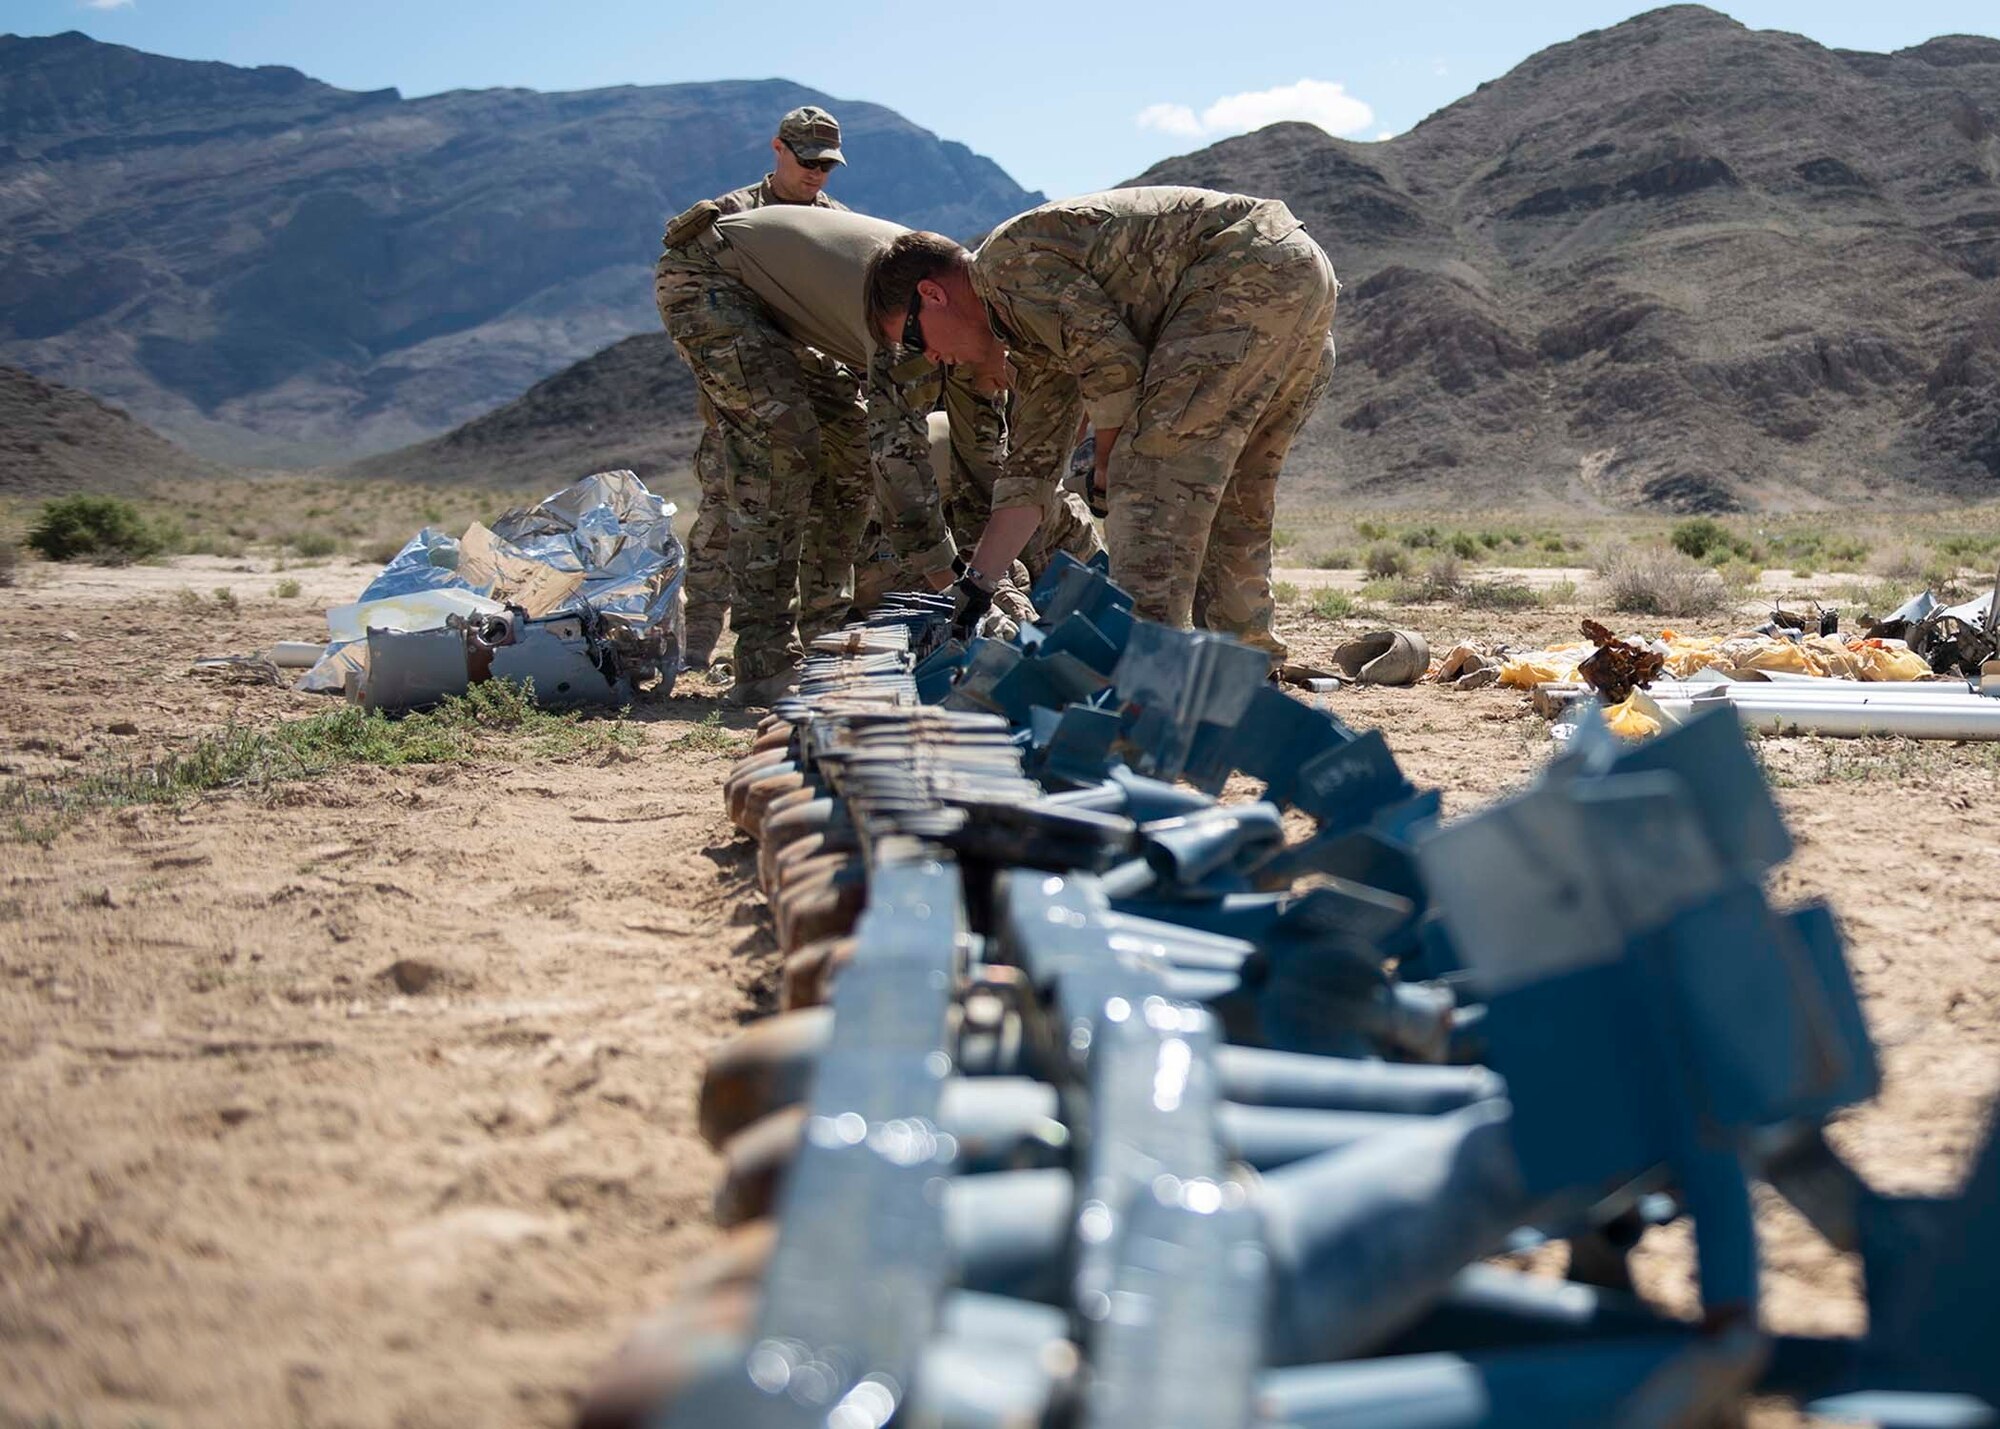 Explosive Ordnance Disposal technicians lay unexploded ordnance on the ground.